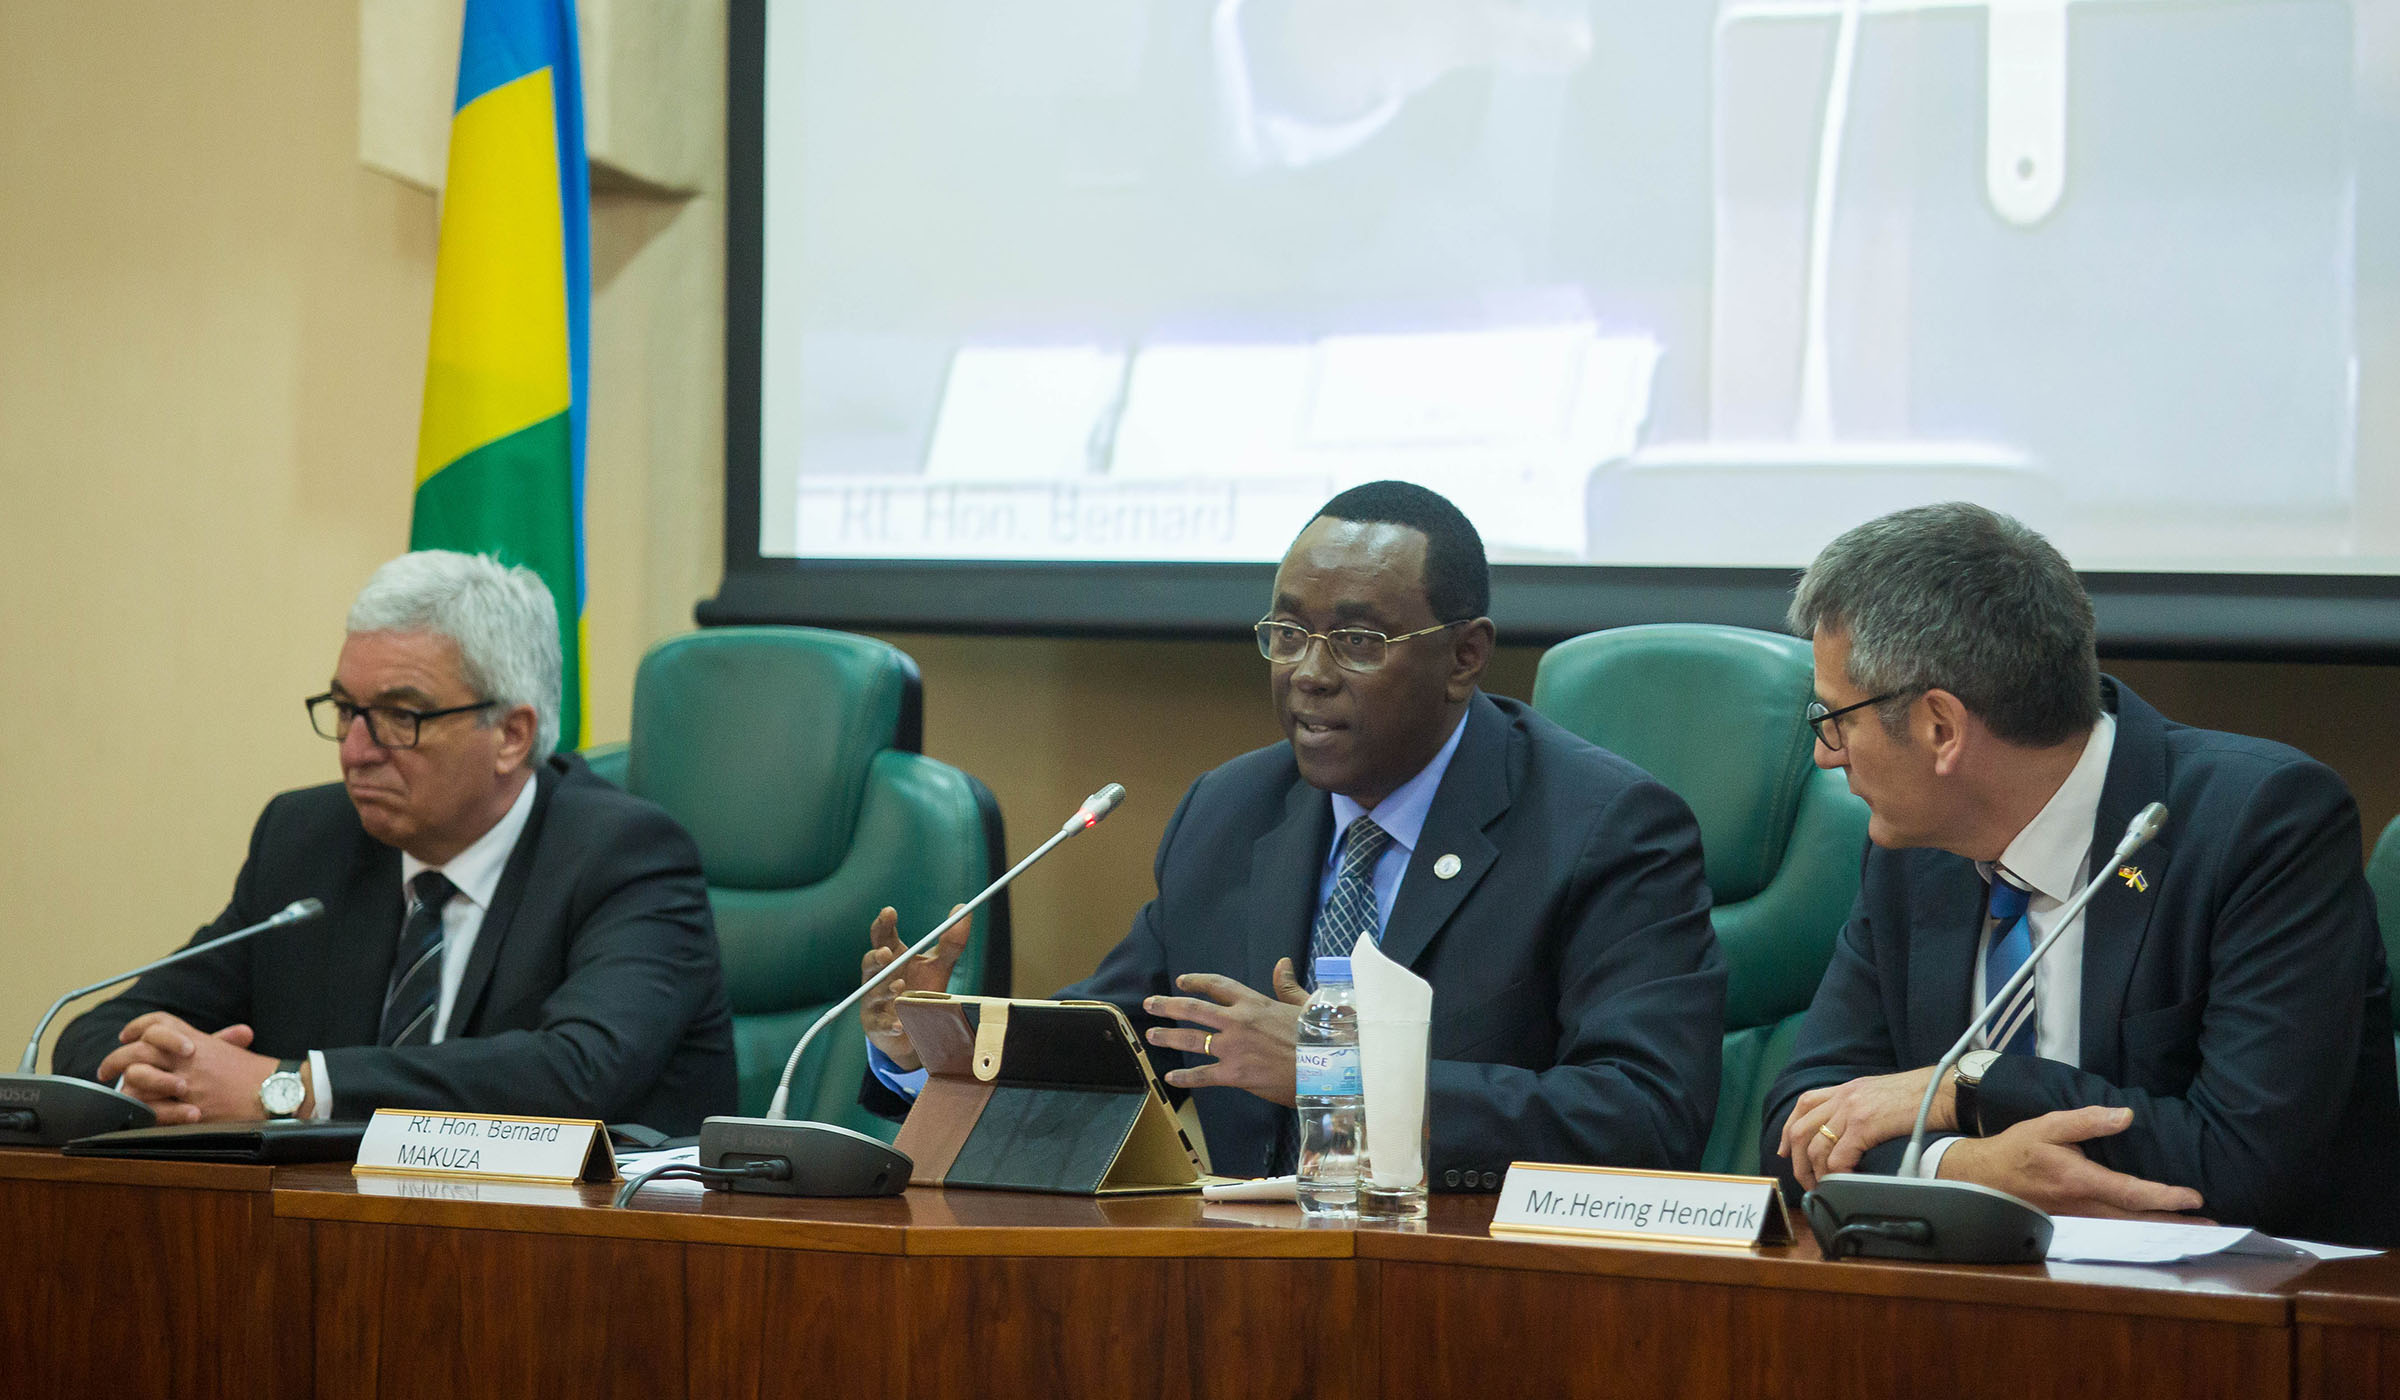 The President of Senate, Bernard Makuza (centre), addresses a delegation from Germanyu2019s Rhineland-Palatinate state. Looking on are Hering Hendrik, the President of the State Parliament (right) and Roger Guenter Josef Lewentz, the Minister for Internal Affairs of Rhineland-Palatinate, at Parliament yesterday. Makuza called on the world to emulate Germany and enact laws that deal with the crime of genocide and other crimes against humanity. Nadege Imbabazi.